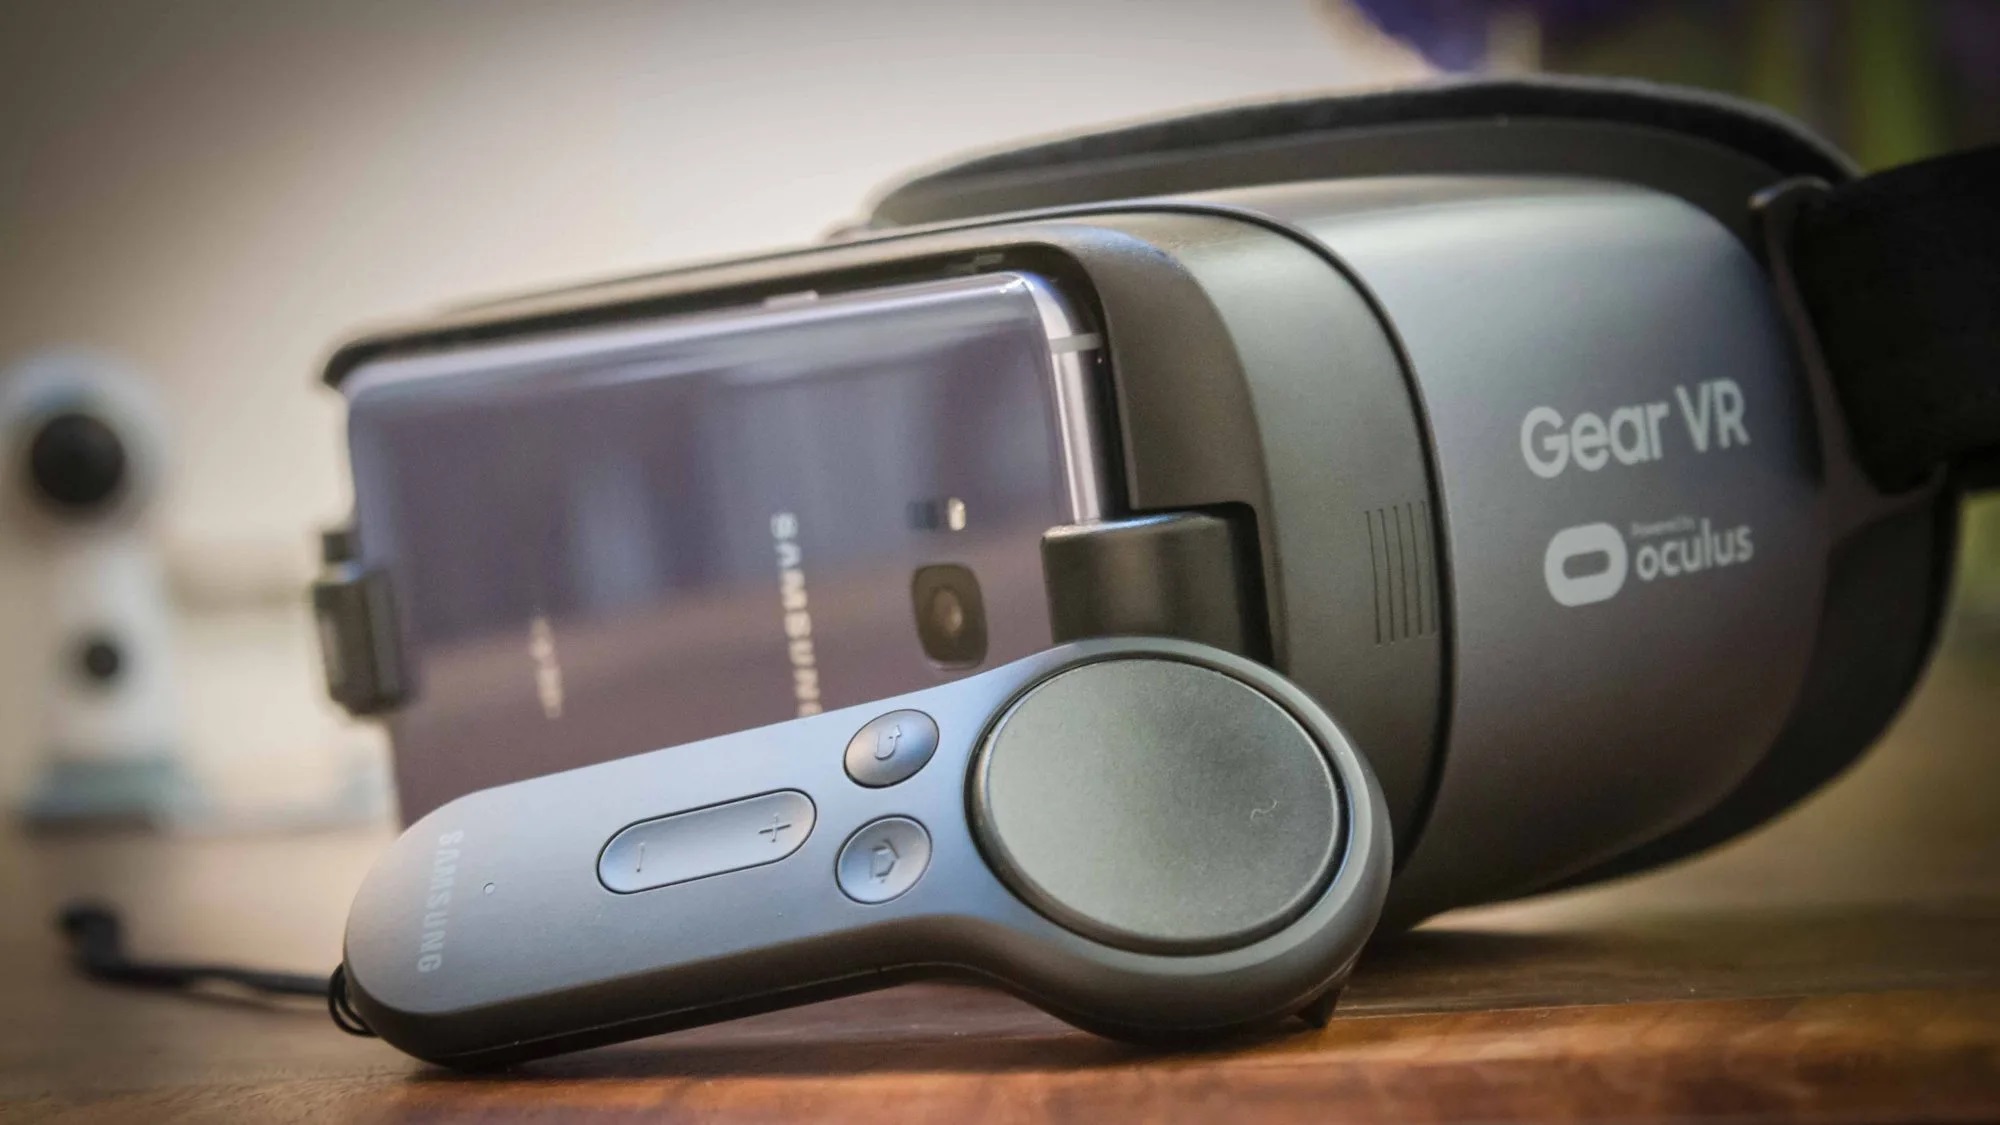 How To Set Up Your Samsung Gear VR With Controller